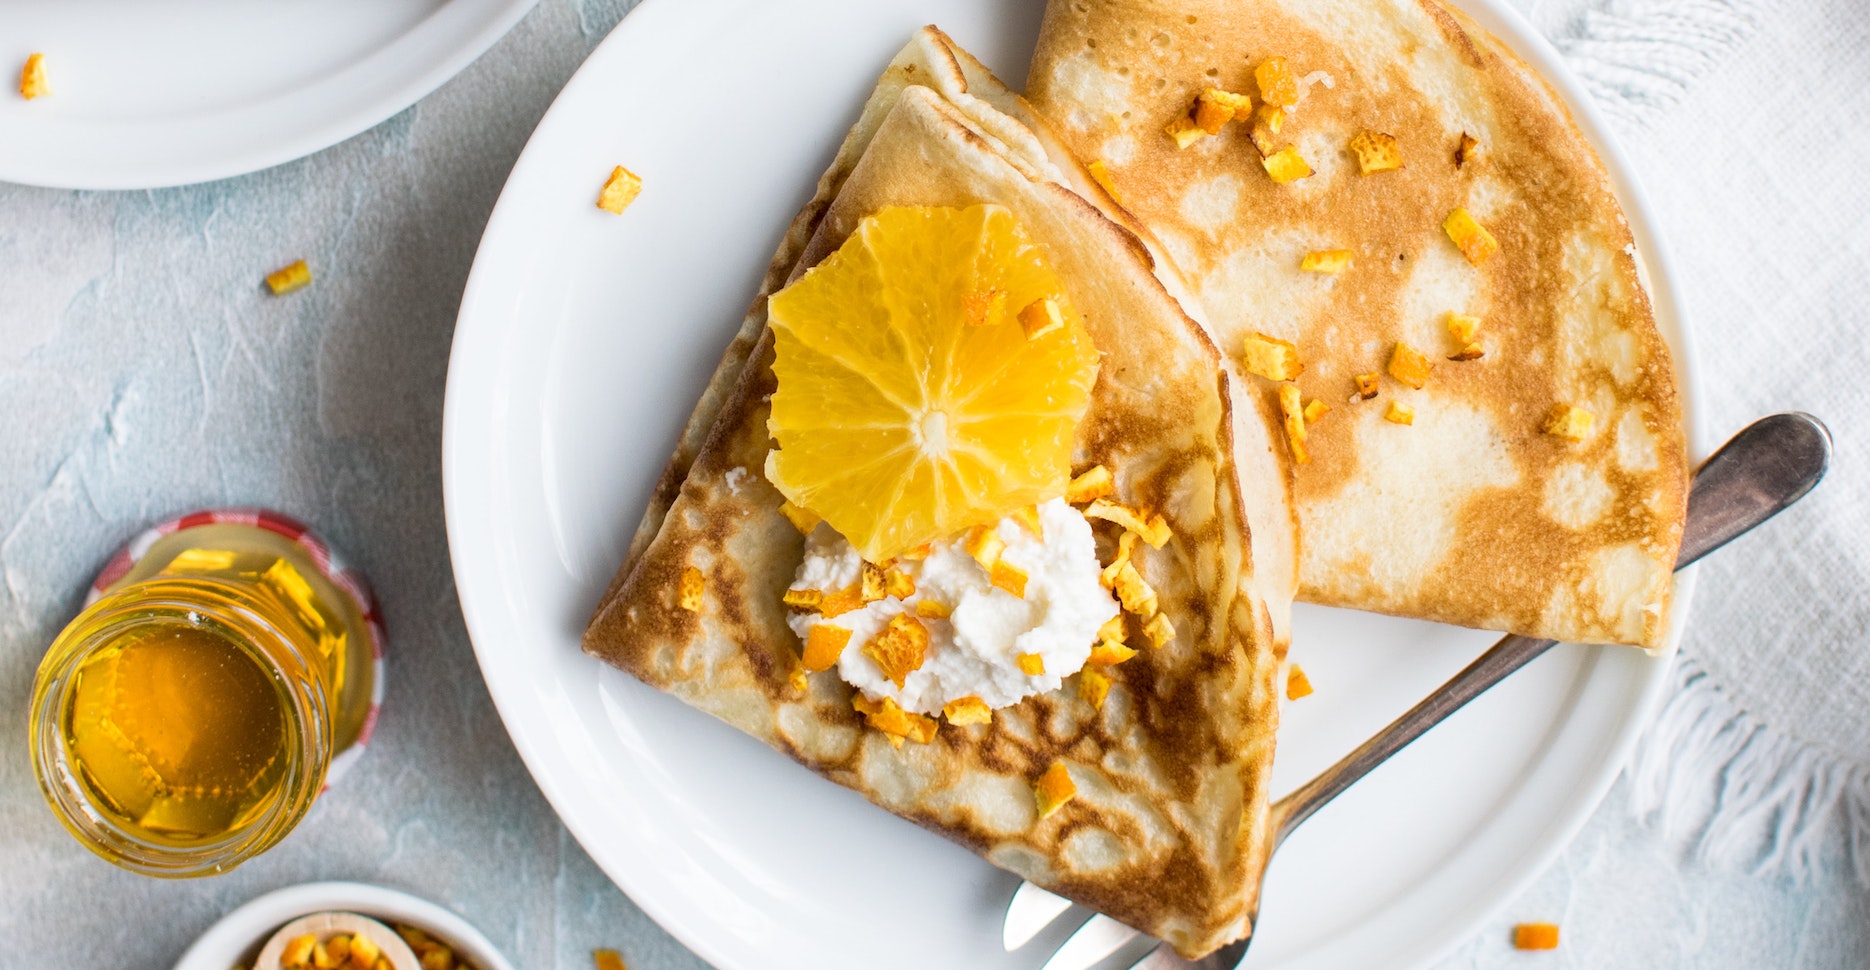 Image of a crepe with oranges and cream on top